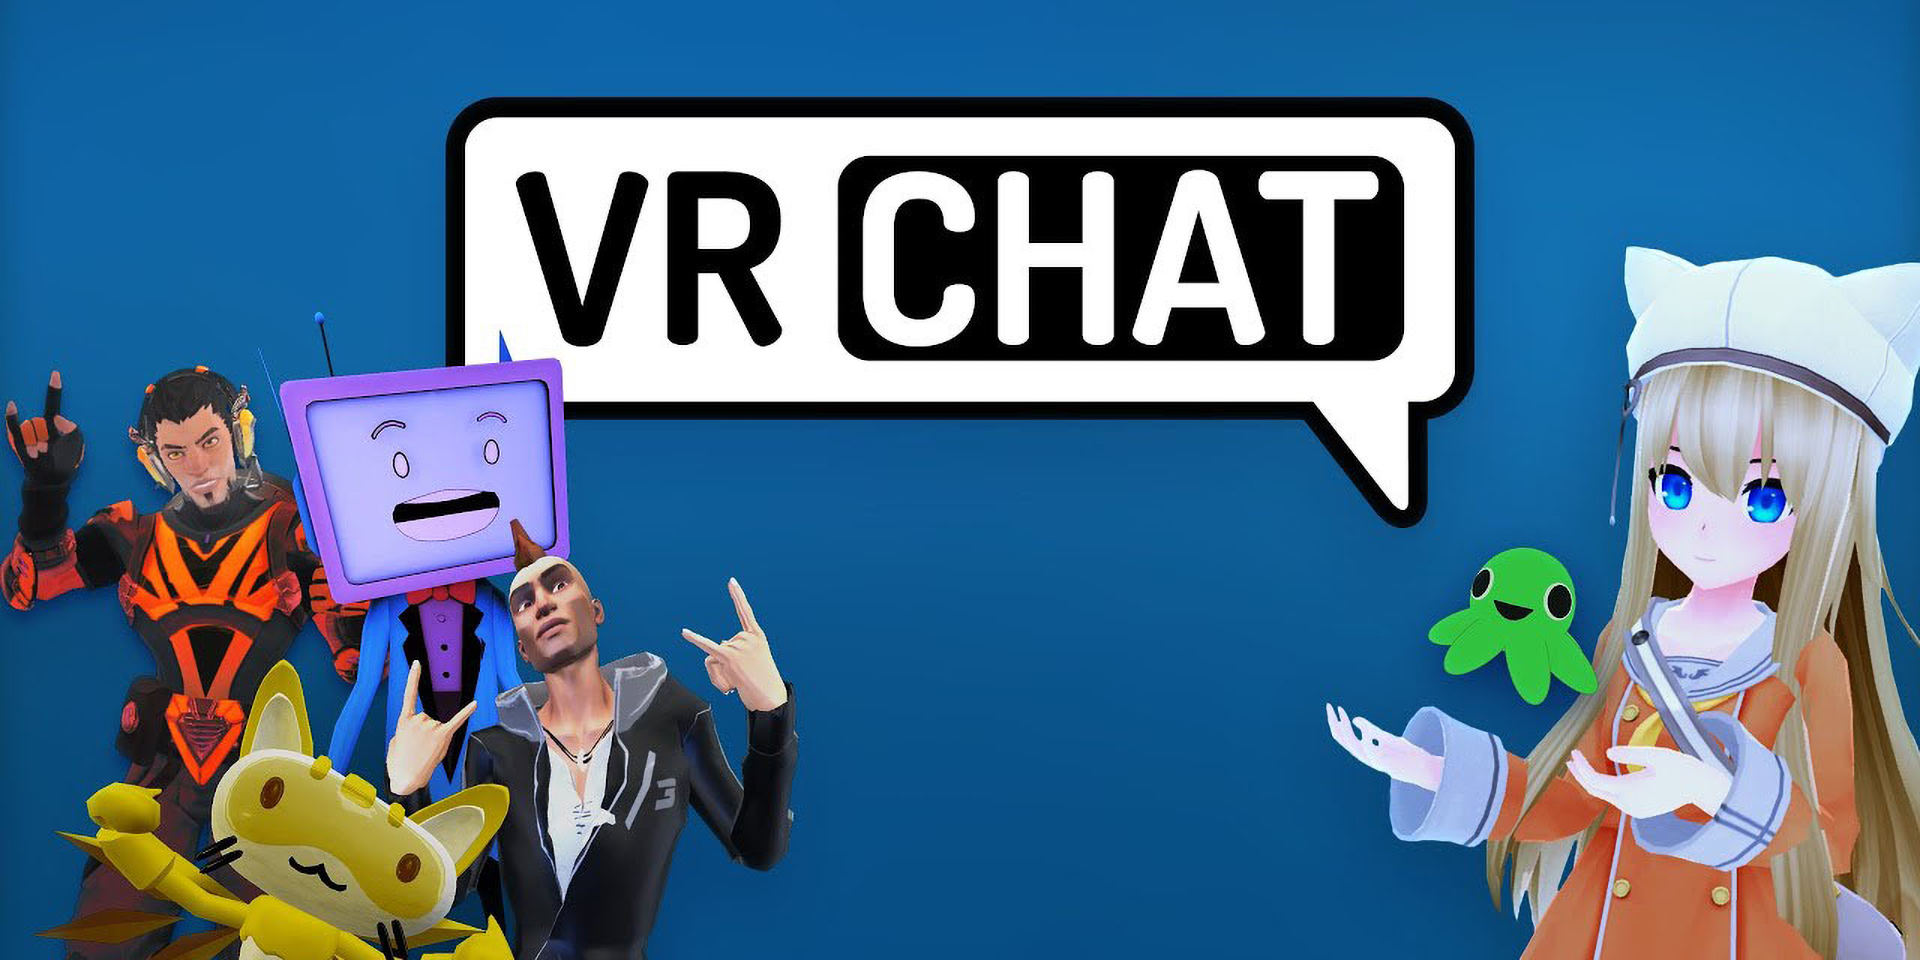 VRChat is coming soon to Pico 4